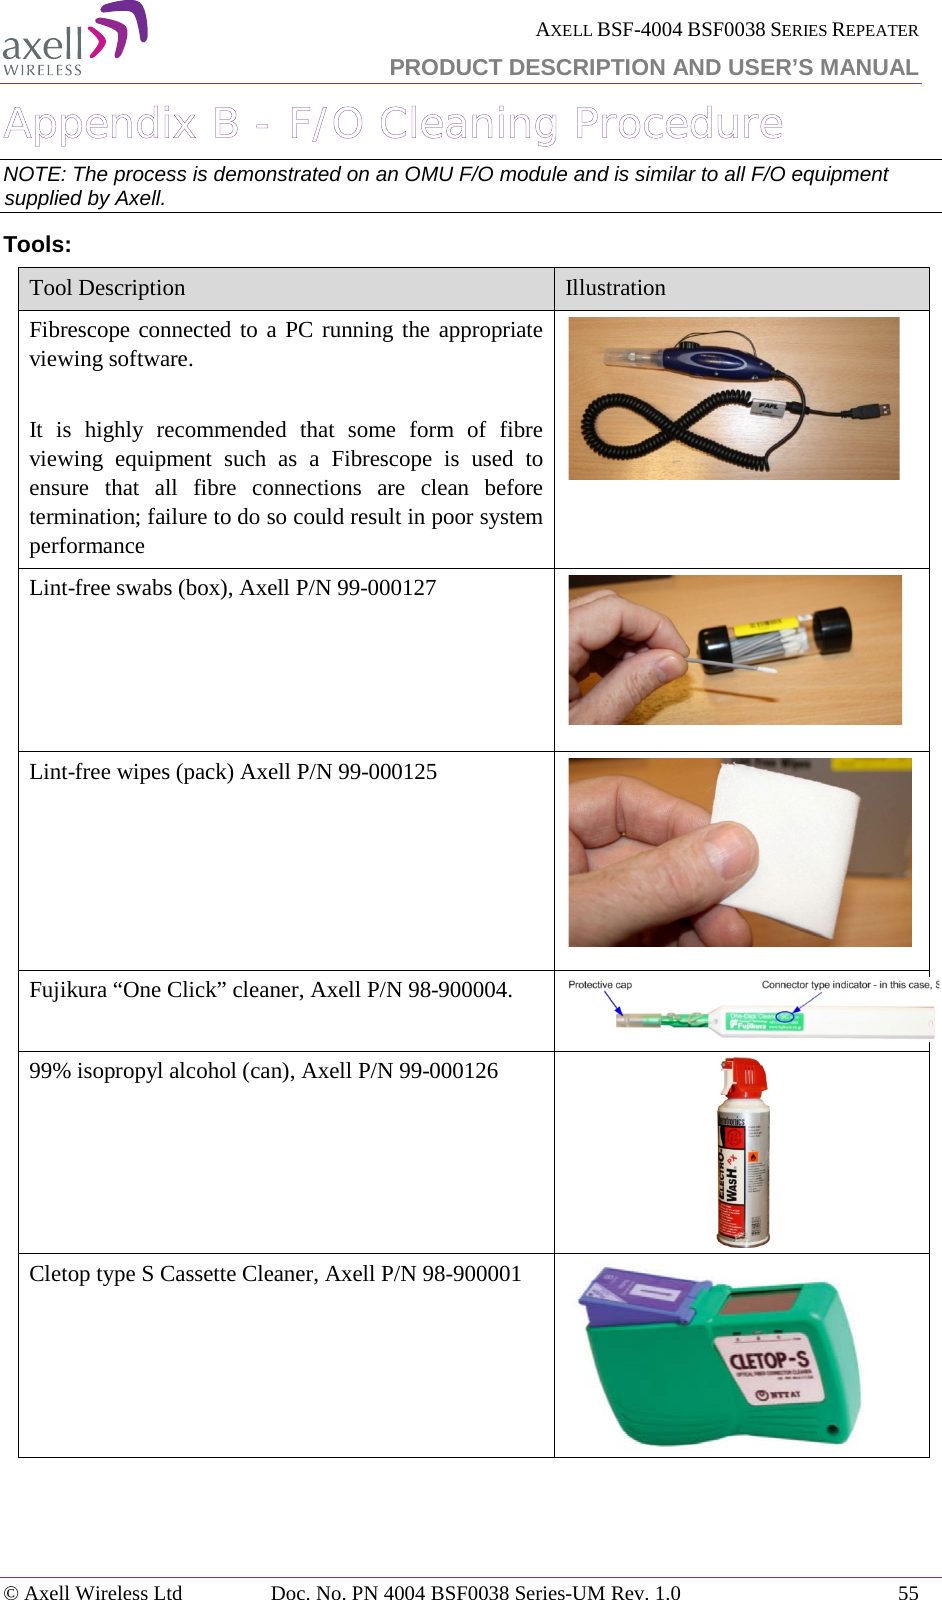  AXELL BSF-4004 BSF0038 SERIES REPEATER PRODUCT DESCRIPTION AND USER’S MANUAL  Appendix B - F/O Cleaning Procedure NOTE: The process is demonstrated on an OMU F/O module and is similar to all F/O equipment supplied by Axell. Tools:  Tool Description  Illustration Fibrescope connected to a PC running the appropriate viewing software.  It is highly recommended that some form of fibre viewing equipment such as a Fibrescope is used to ensure that all fibre connections are clean before termination; failure to do so could result in poor system performance  Lint-free swabs (box), Axell P/N 99-000127      Lint-free wipes (pack) Axell P/N 99-000125       Fujikura “One Click” cleaner, Axell P/N 98-900004.   99% isopropyl alcohol (can), Axell P/N 99-000126  Cletop type S Cassette Cleaner, Axell P/N 98-900001  © Axell Wireless Ltd Doc. No. PN 4004 BSF0038 Series-UM Rev. 1.0 55 